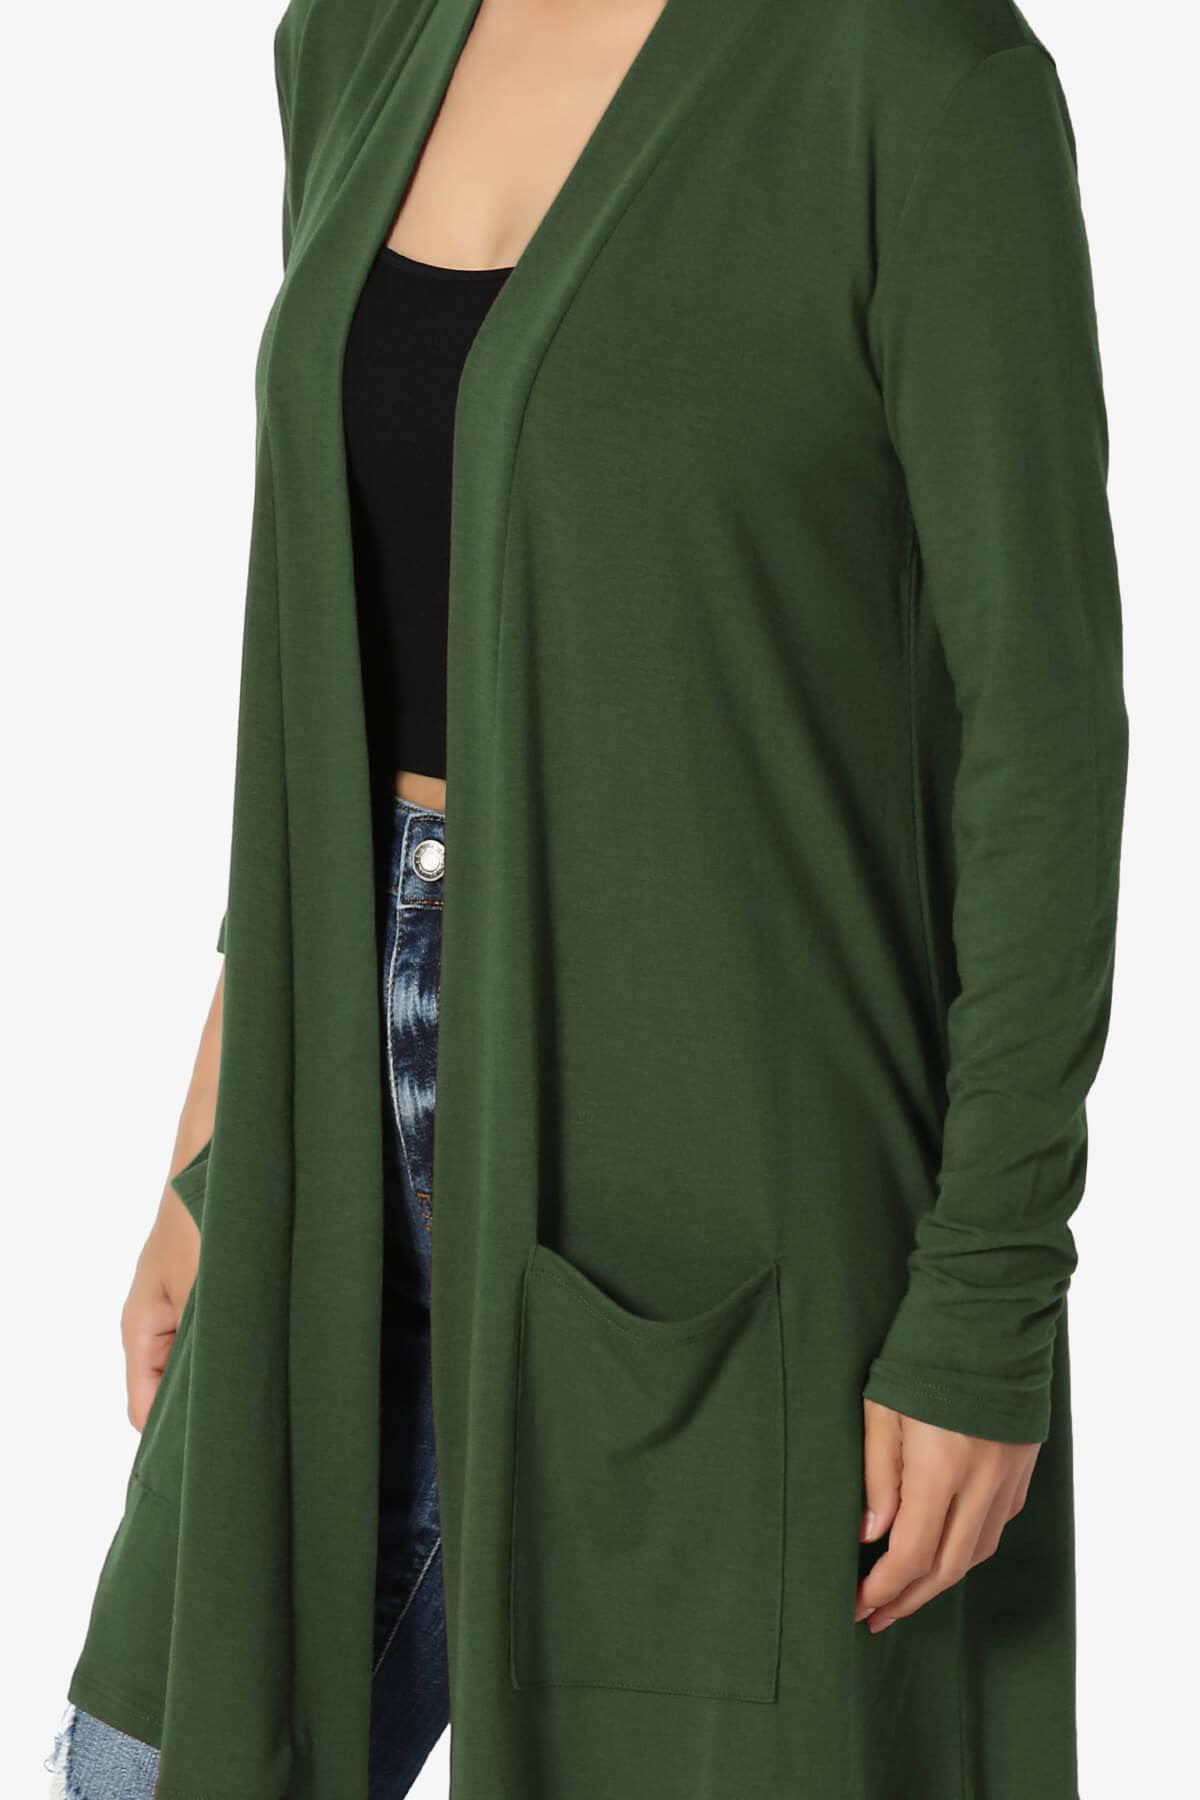 Daday Long Sleeve Pocket Open Front Cardigan ARMY GREEN_5